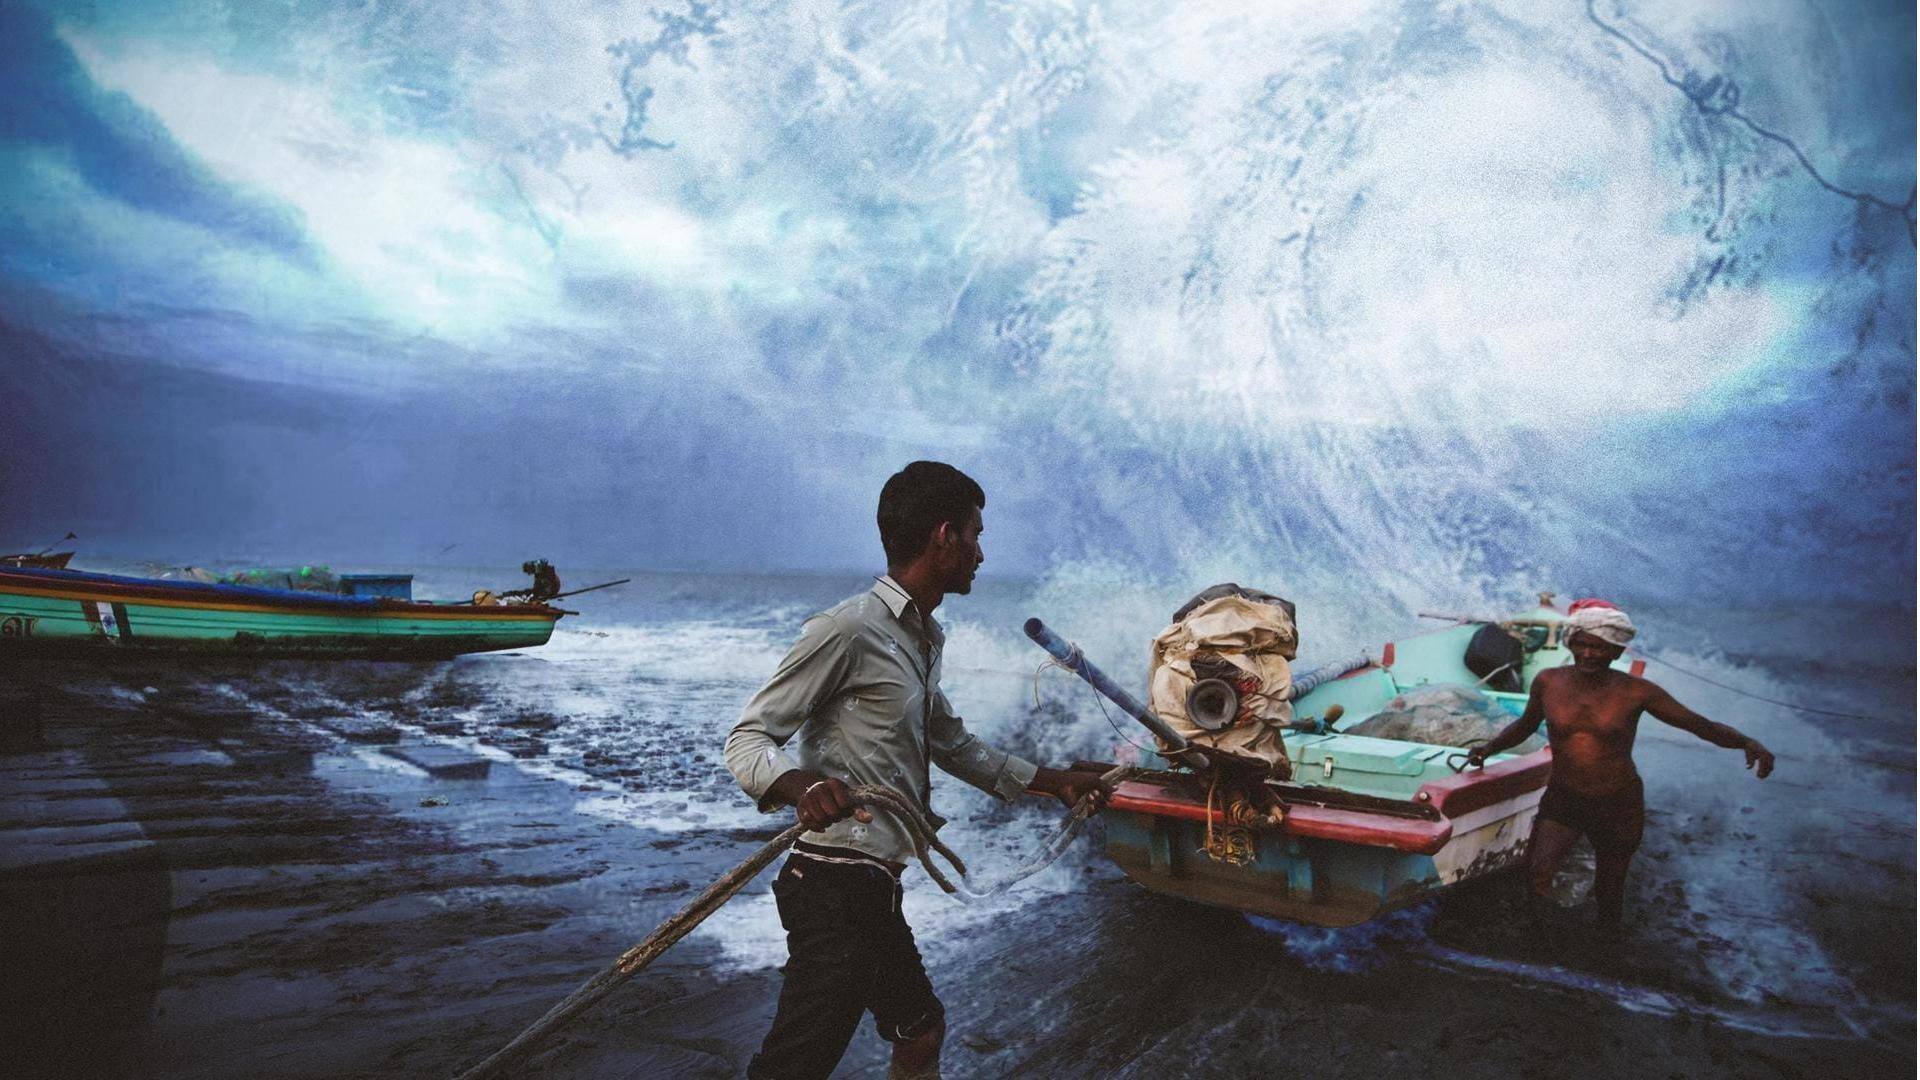 Cyclone Biparjoy to intensify further in next 36 hours: IMD